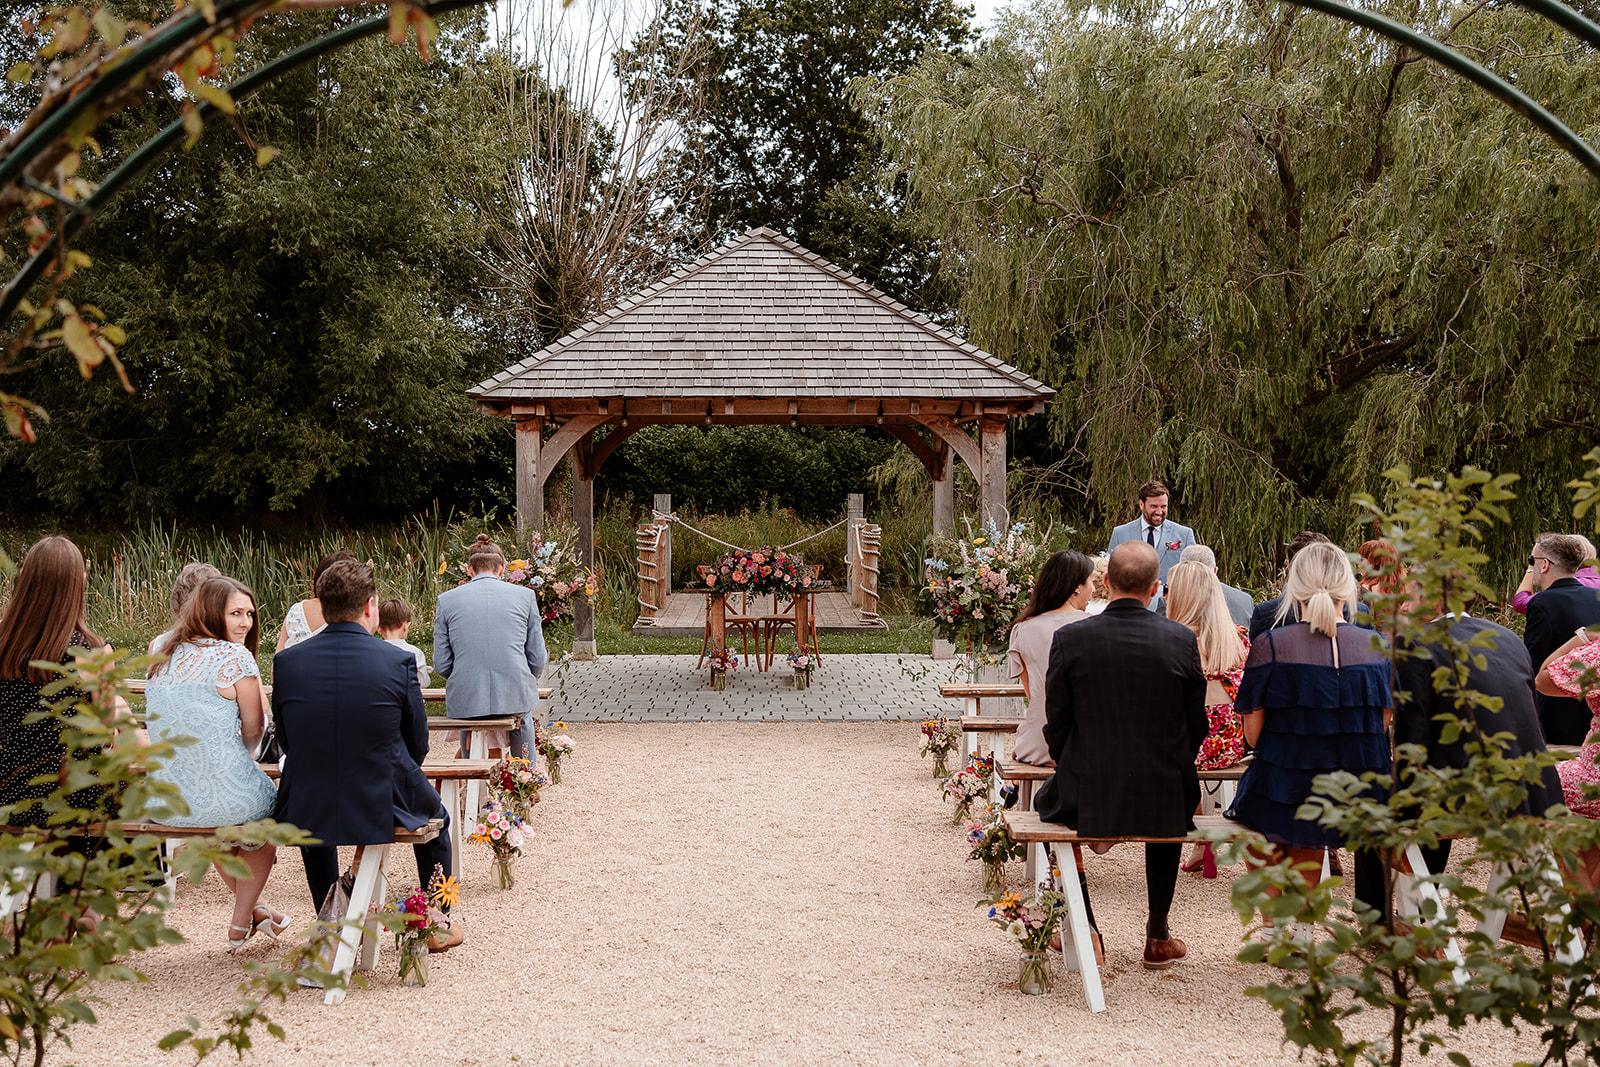 All the guests seated by the outdoor wedding pergola at a summer wedding at Silchester Farm